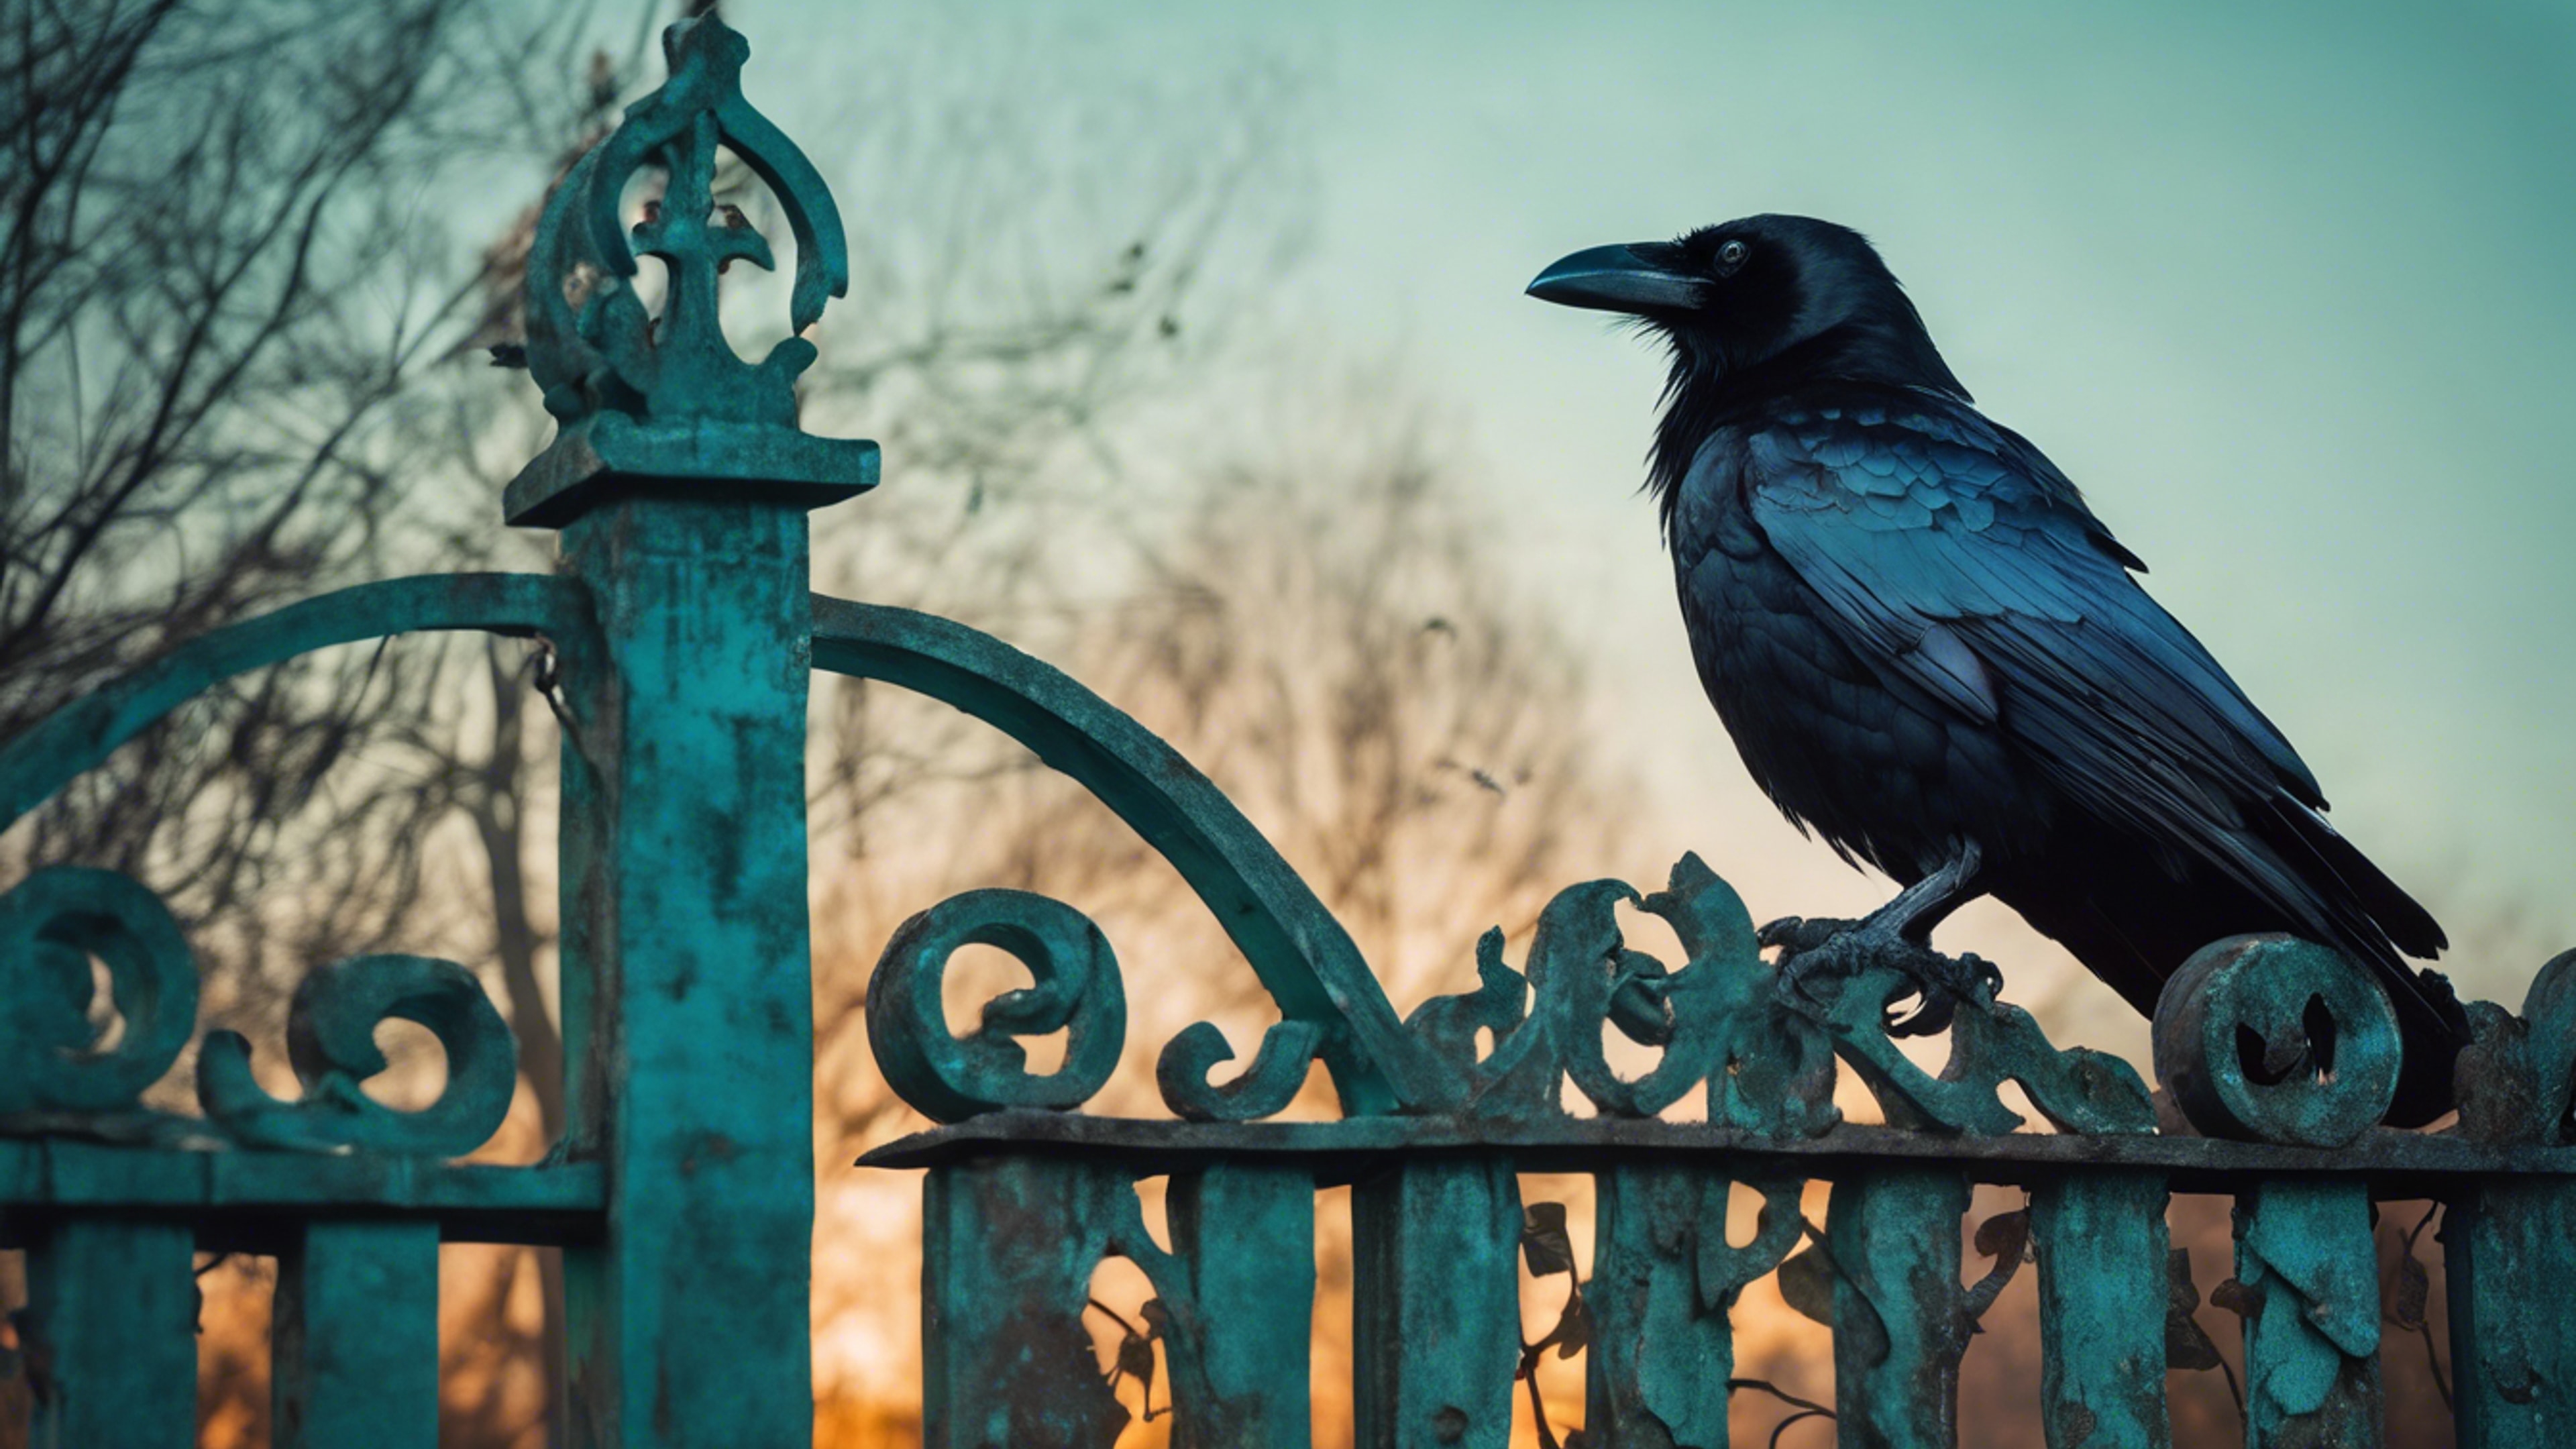 A Gothic raven perched on a dilapidated garden gate, aglow with the mesmerizing light of a teal moon. Kertas dinding[c5fc313733614ce1ad34]